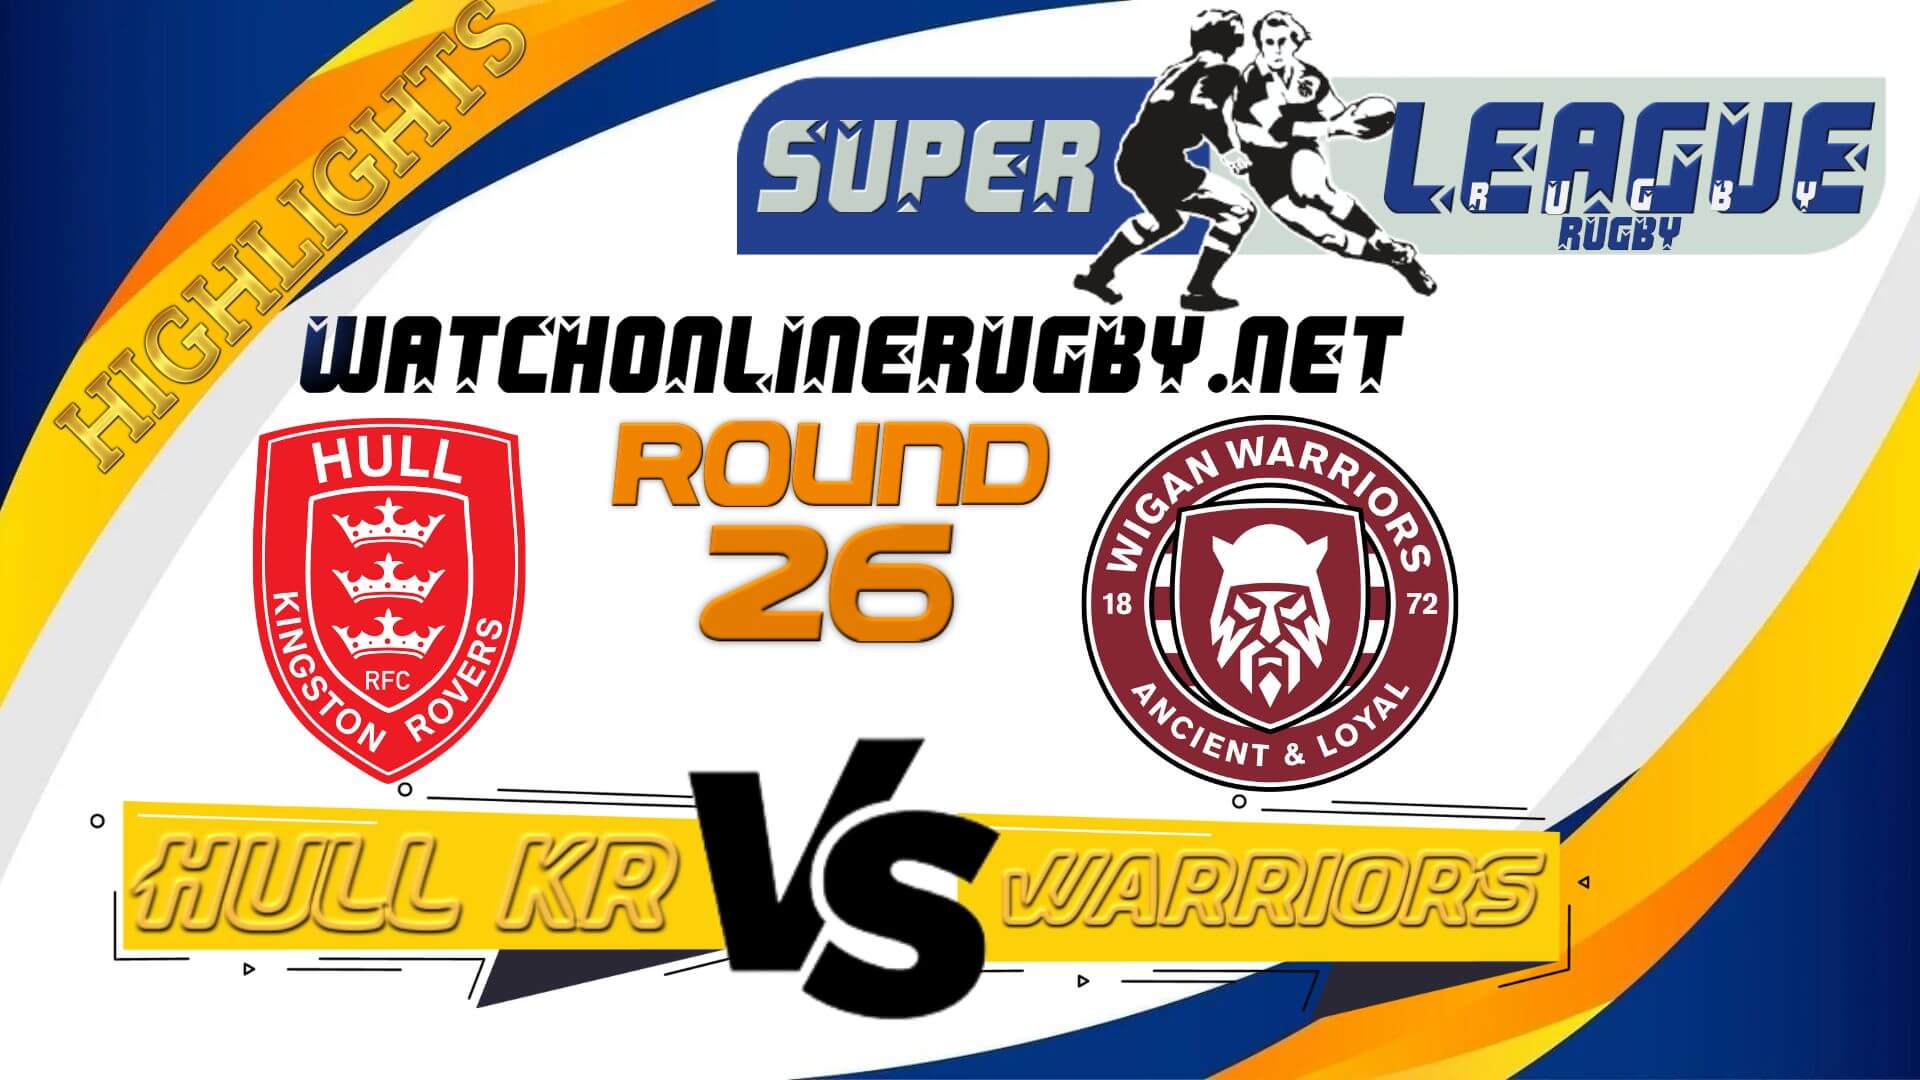 Hull KR Vs Wigan Warriors Super League Rugby 2022 RD 26